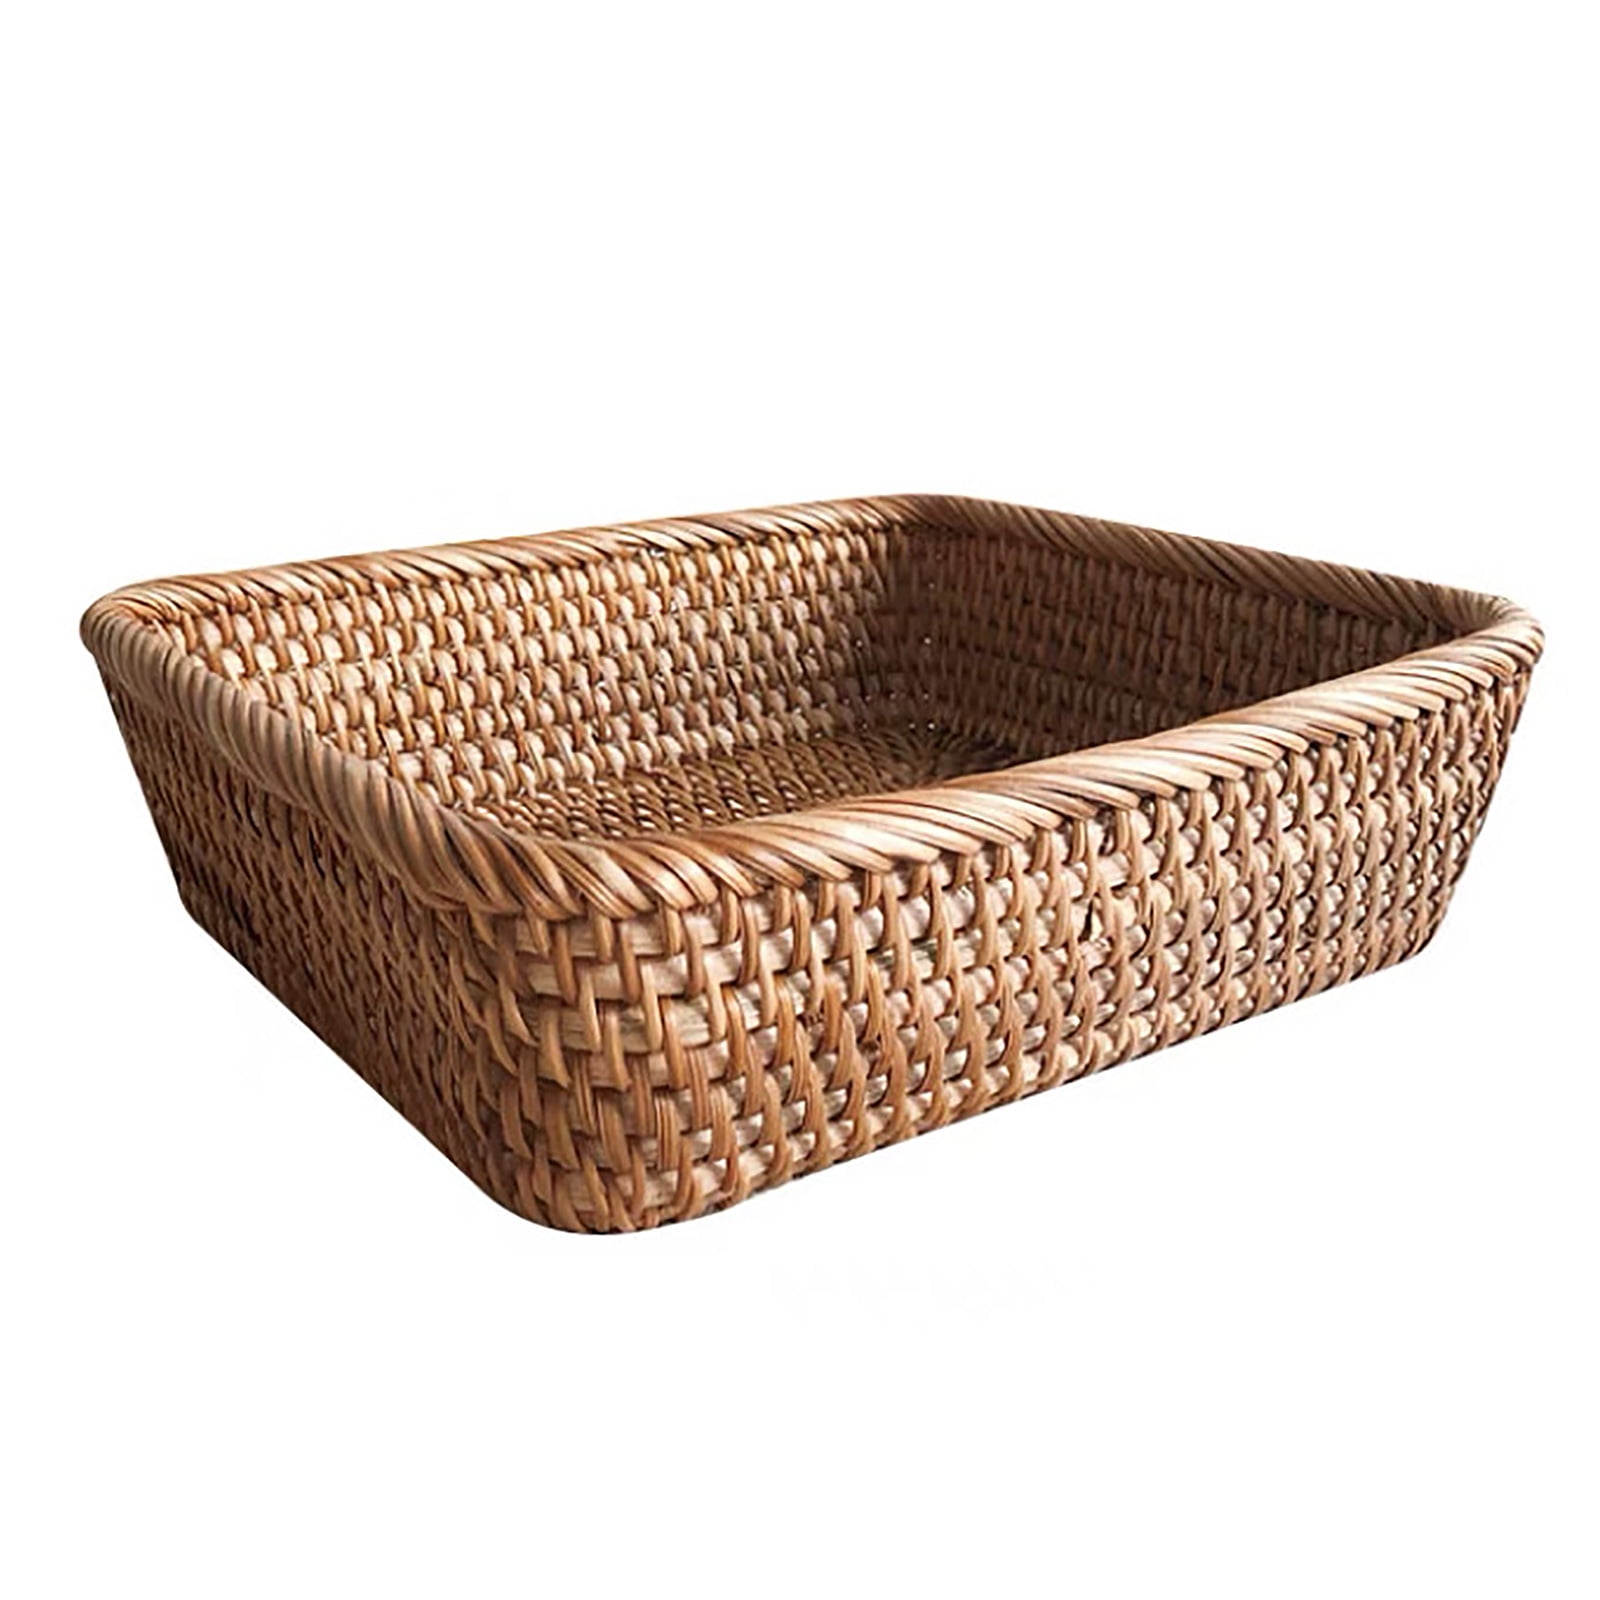 Baby Small Storage Baskets Rope Basket Woven Laundry Household Cotton Bask Jian 